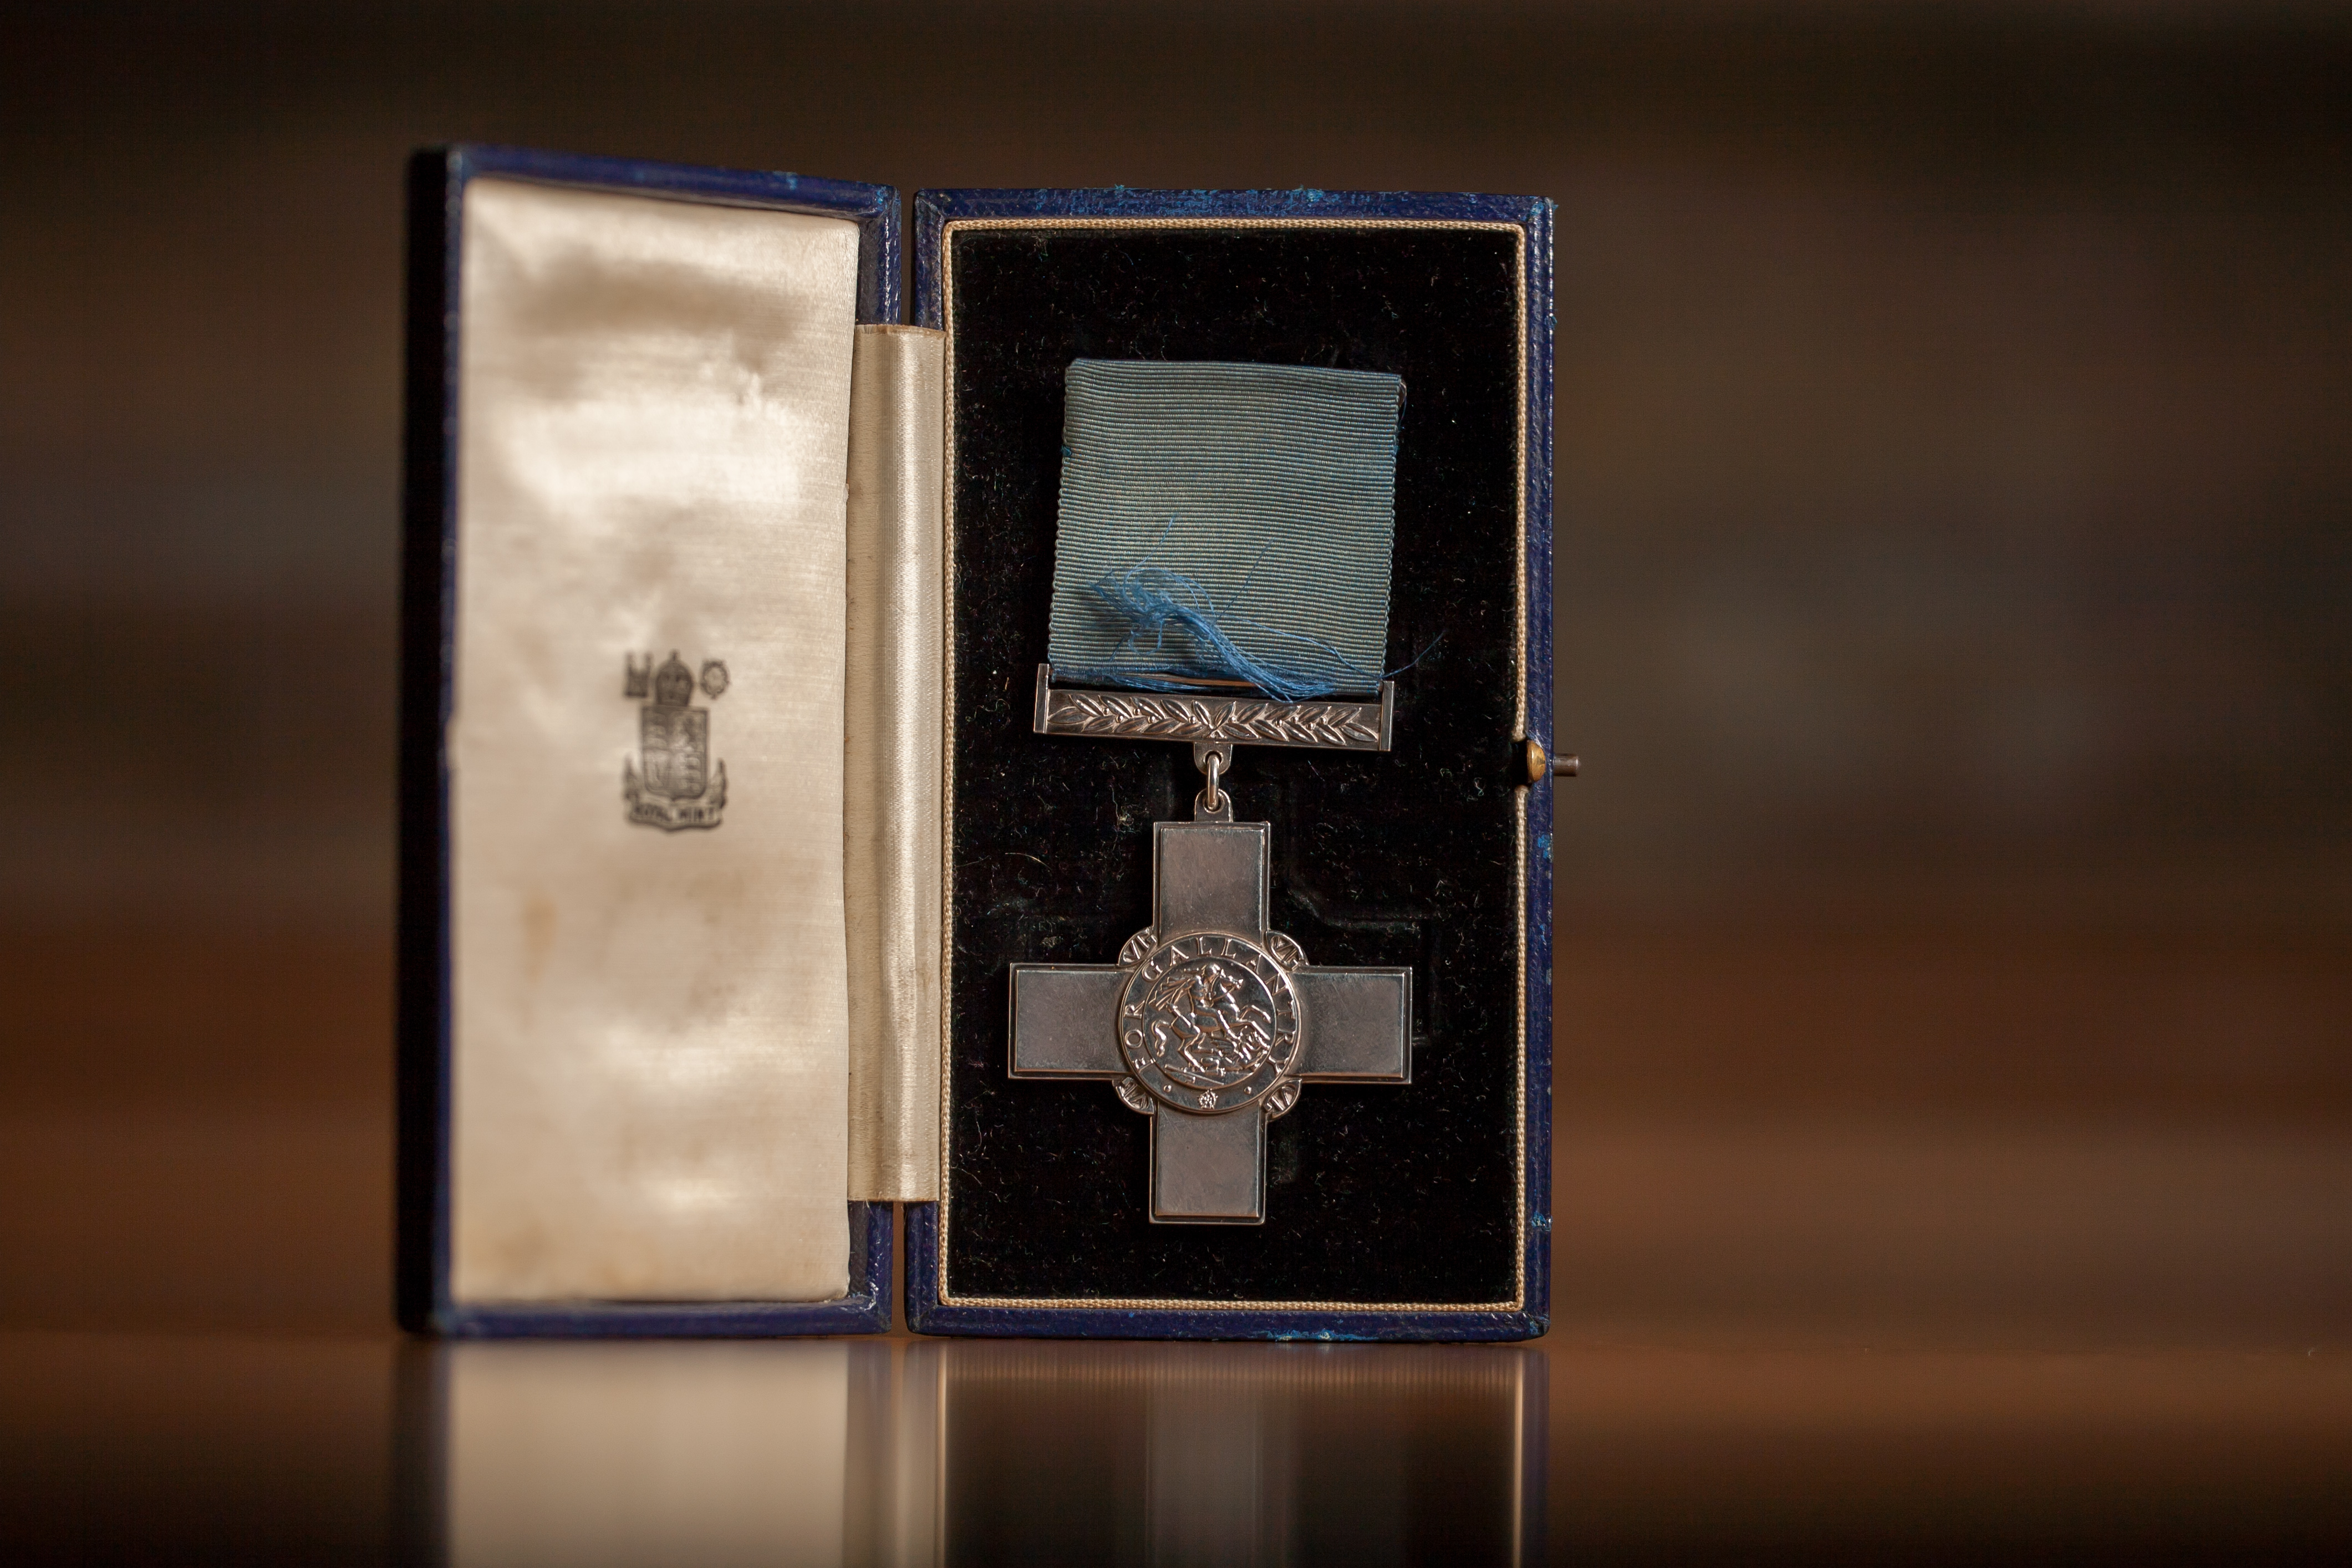 An image of a medal for bravery in world war two